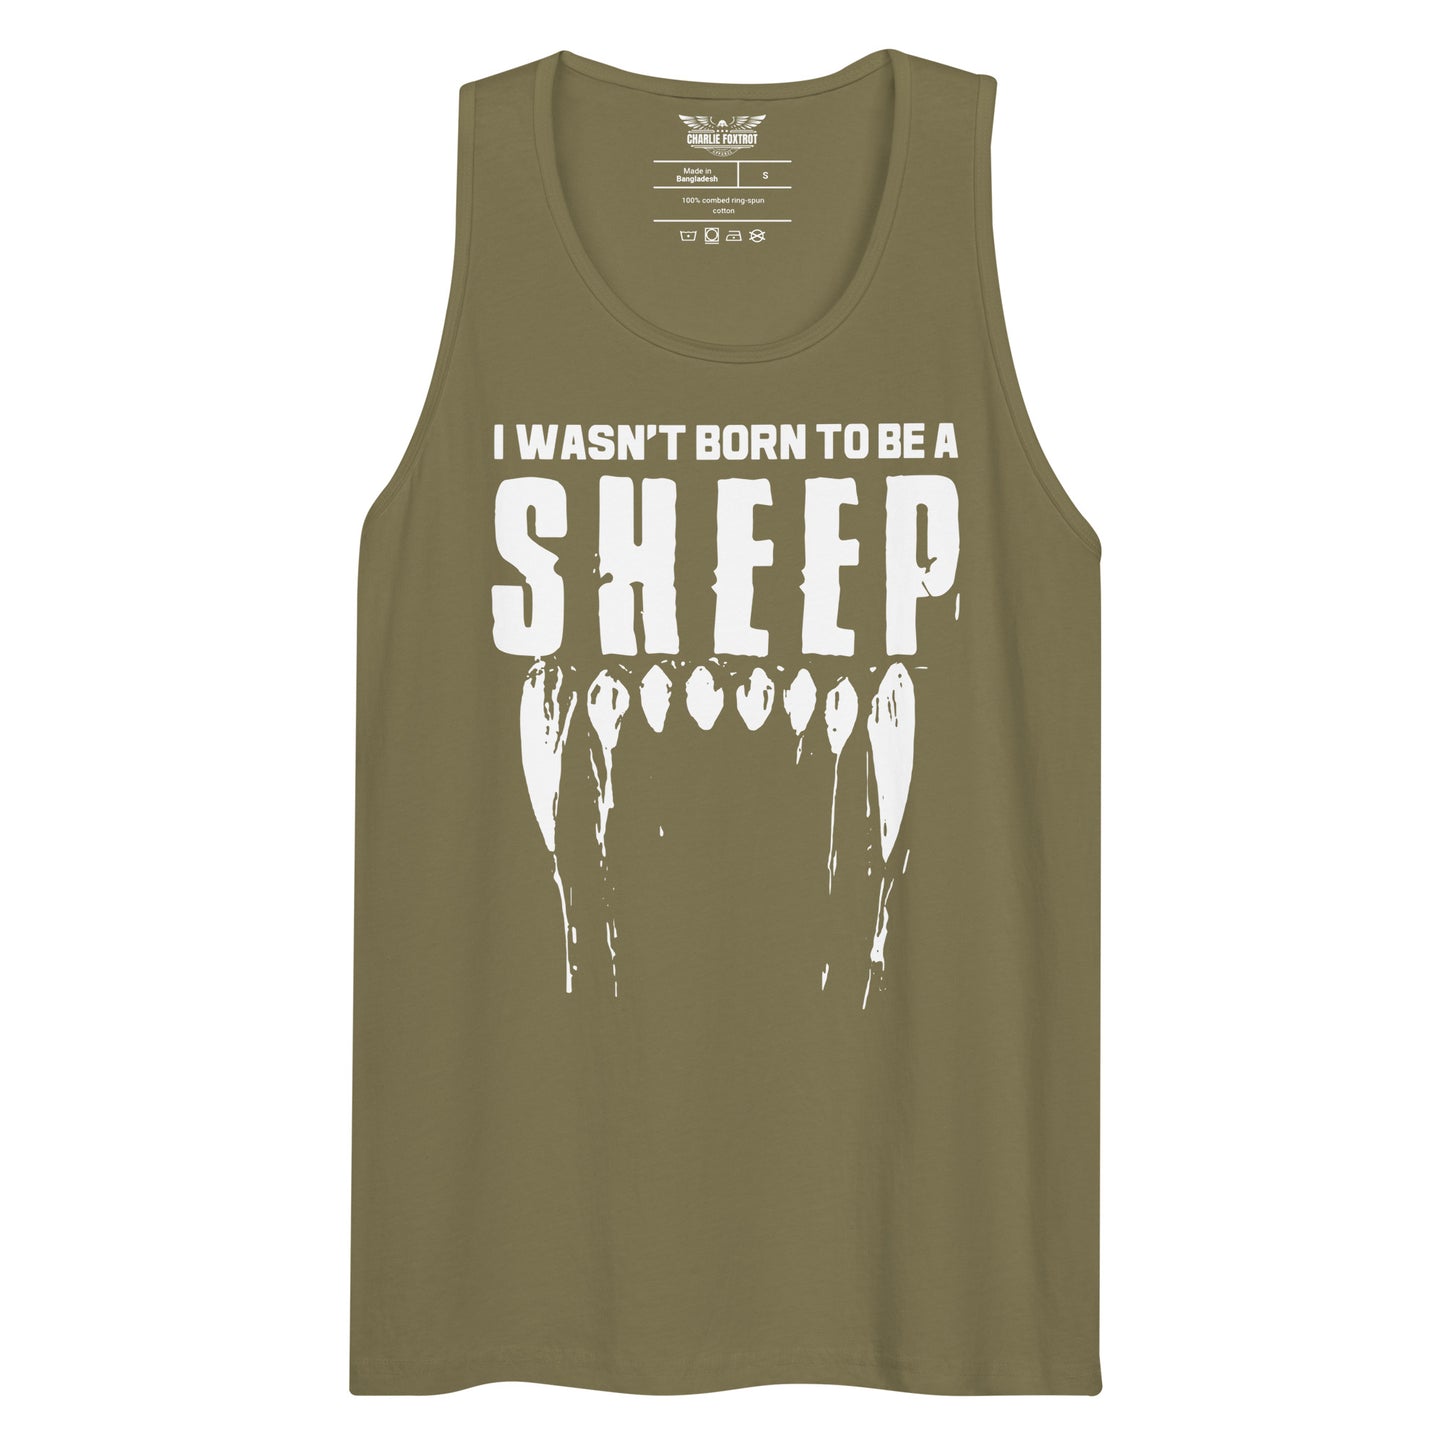 I Wasn't Born To Be A Sheep Tank Top